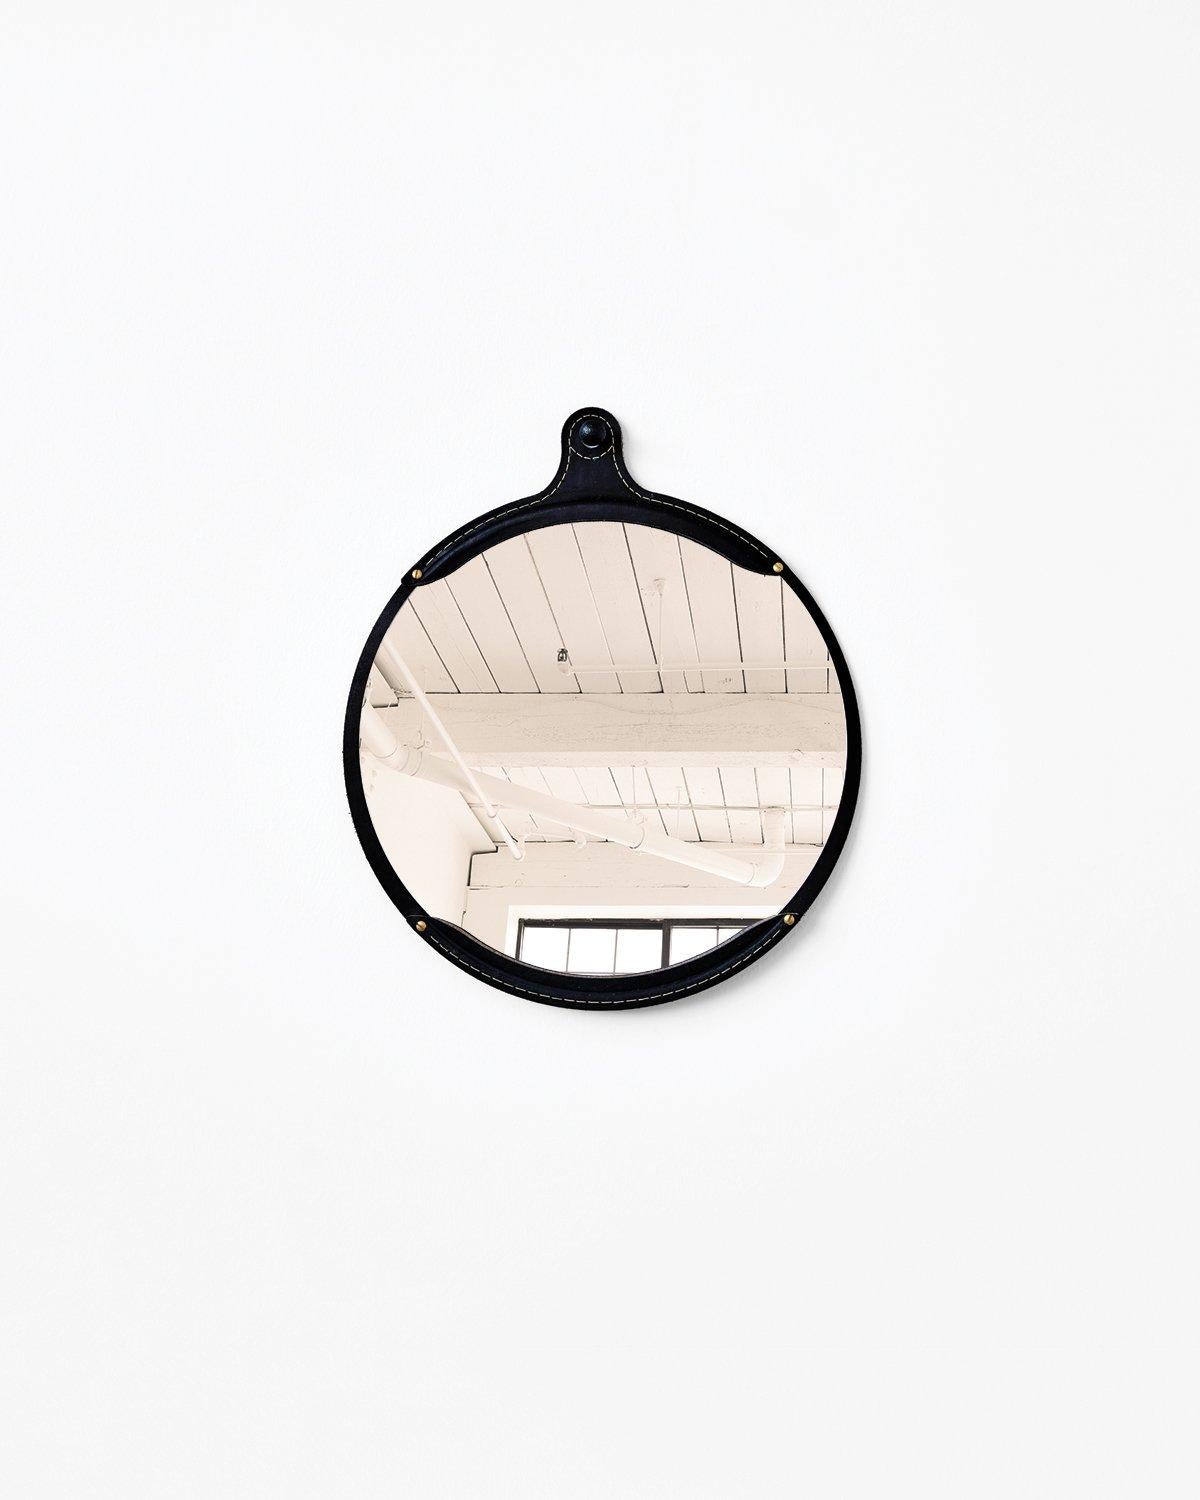 The Fairmount wide oval mirror is a hand-stitched leather mirror with a frame made from natural vegetable tanned leather which will vary in color and darken slightly with age. The mirror sits inside the frame like a pocket. It comes with an iron